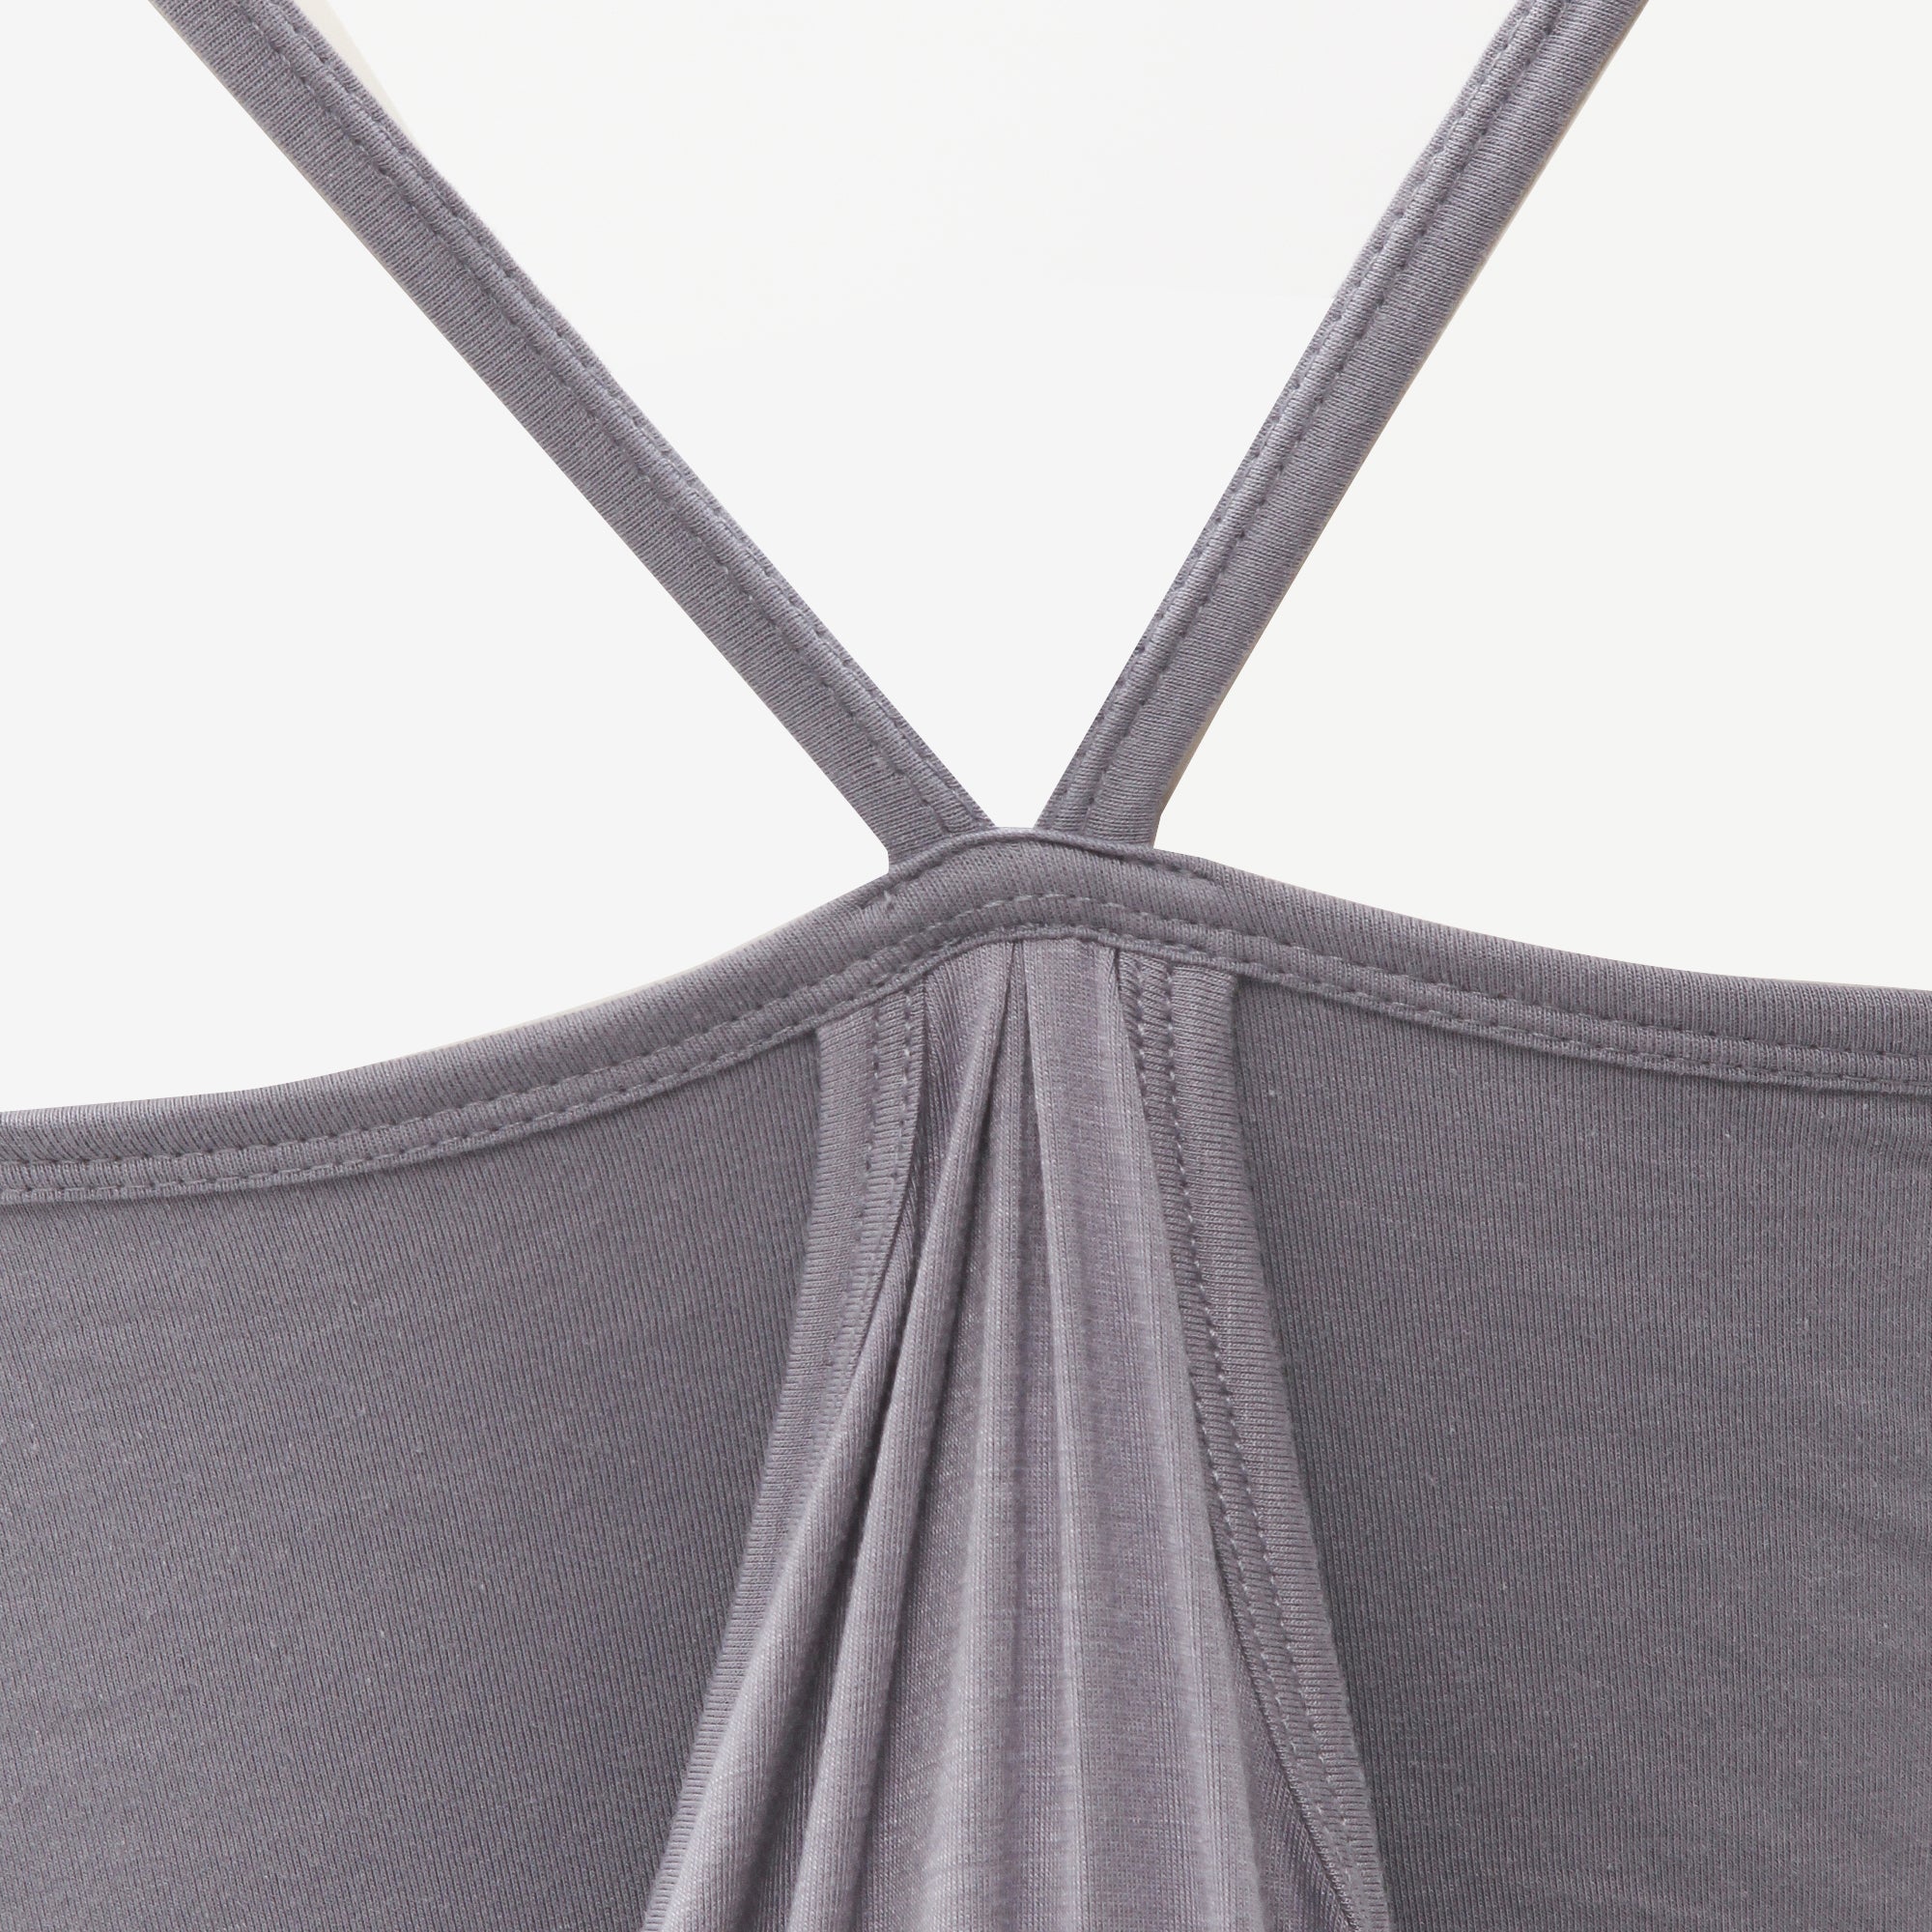 Zen Organic Long Length Loose Yoga Top With Support - Blue Grey/Black